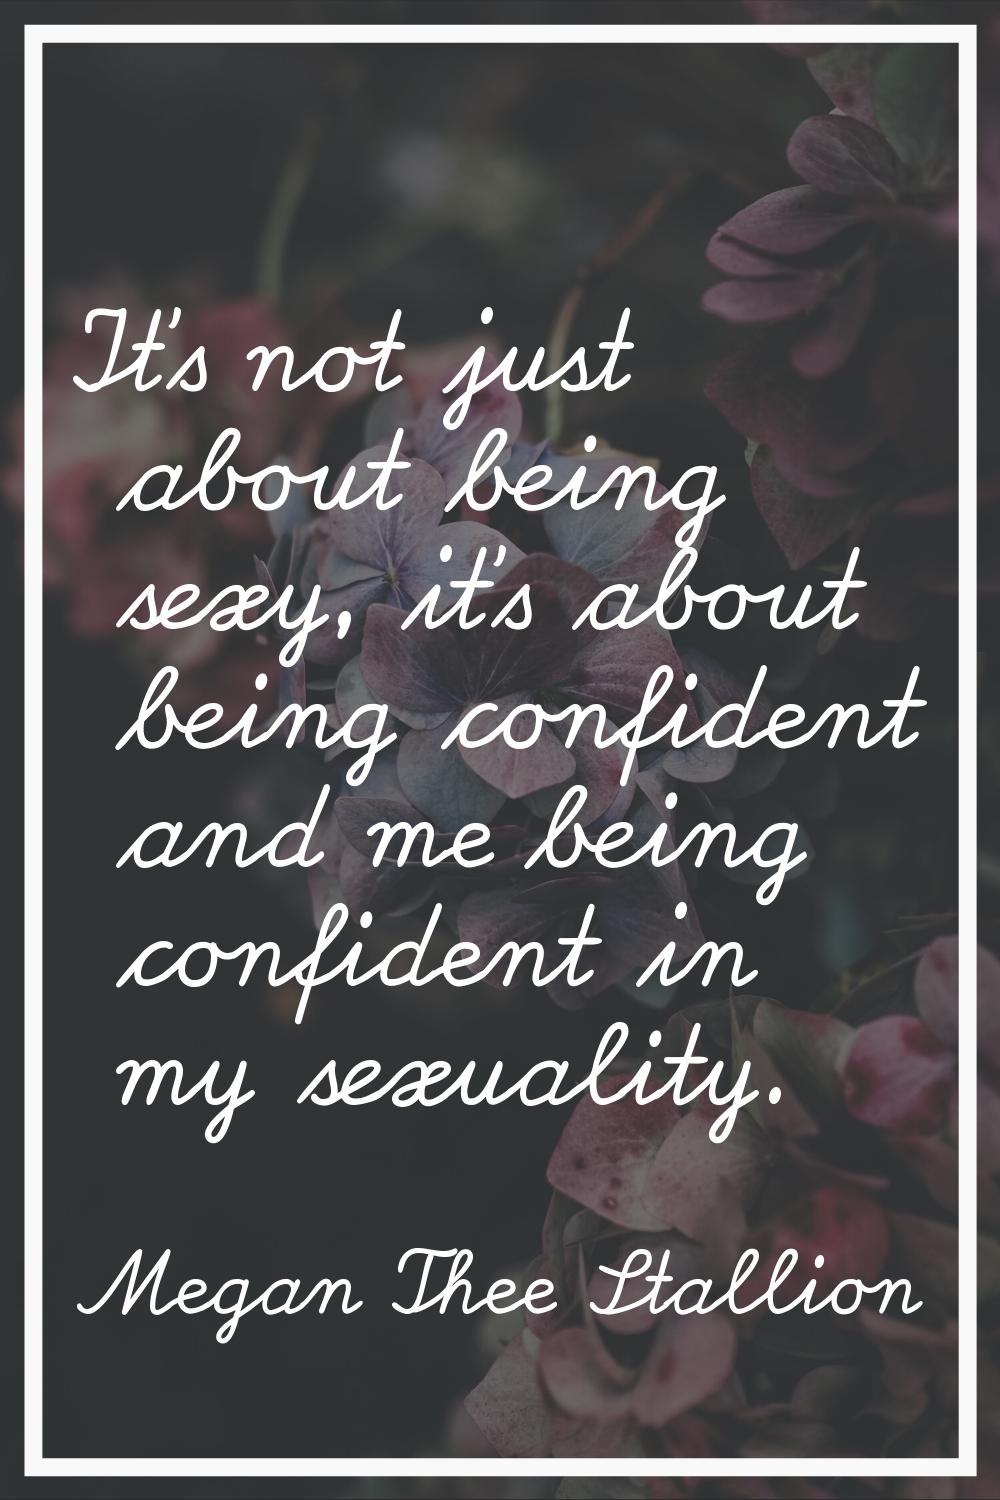 It's not just about being sexy, it's about being confident and me being confident in my sexuality.